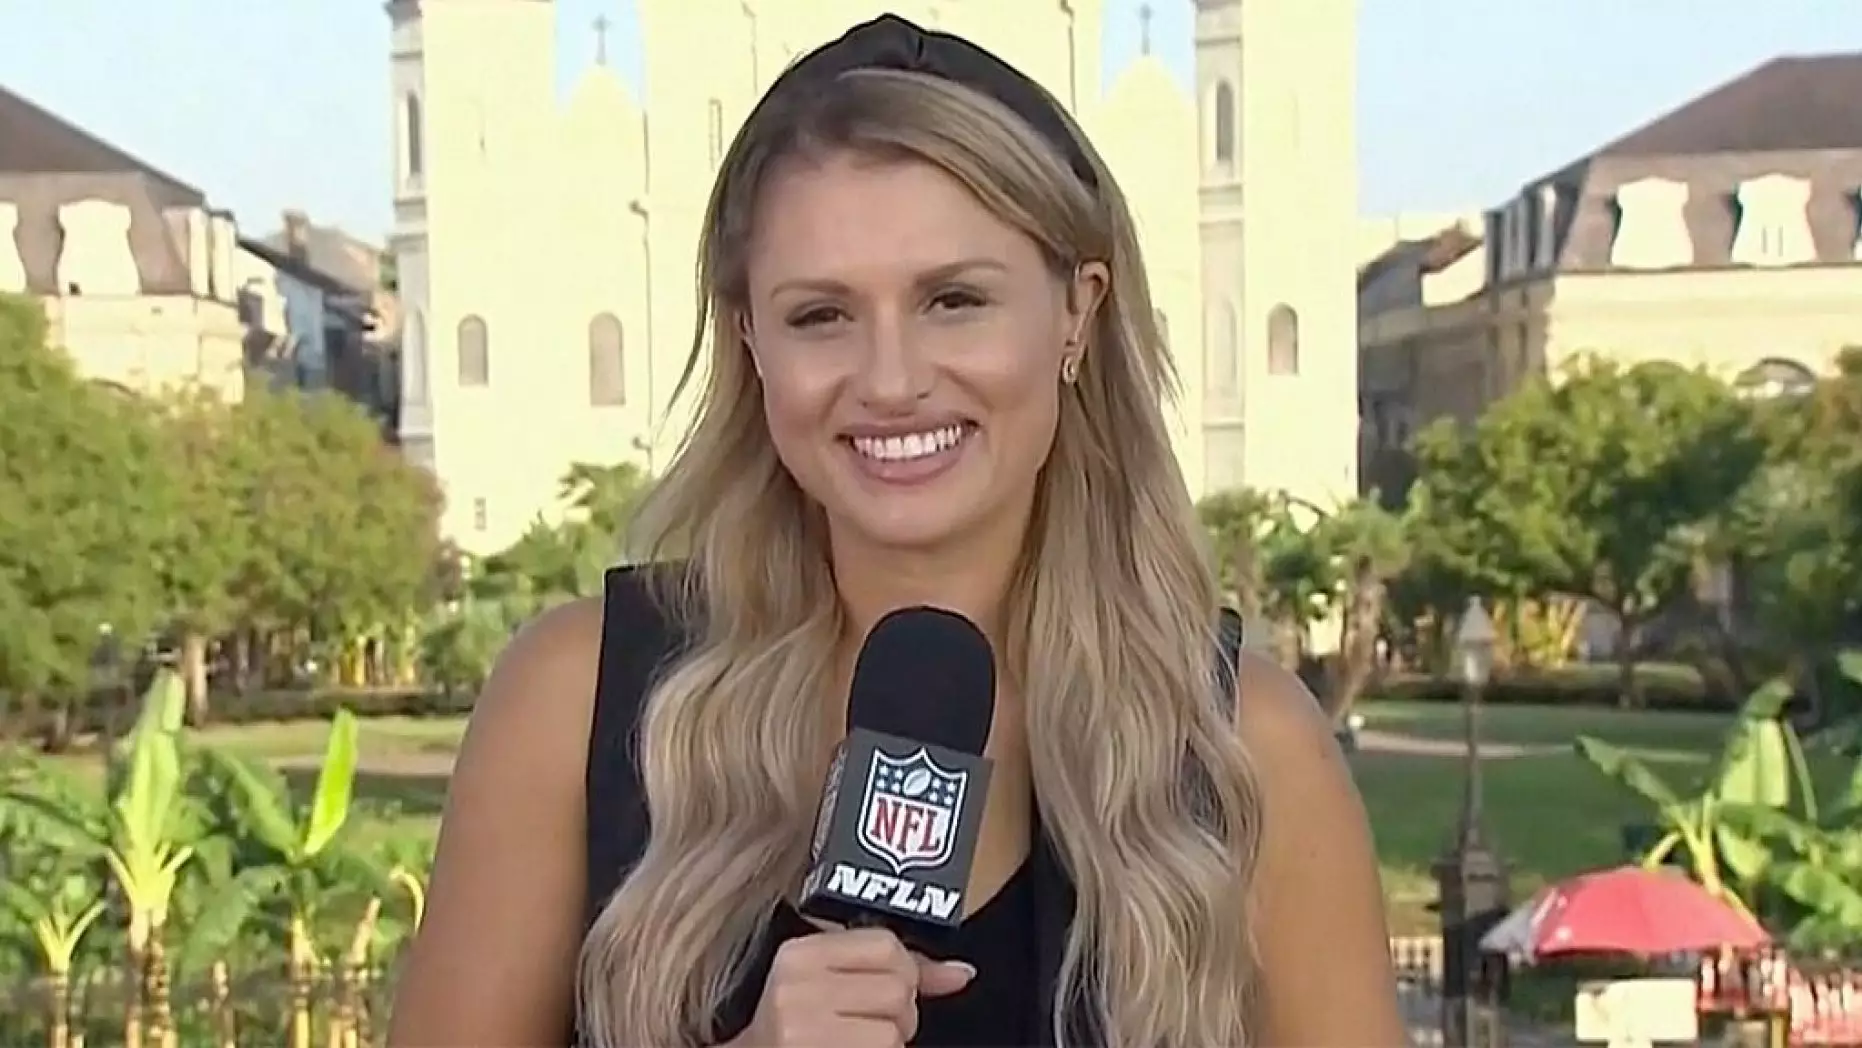 Jane reporting for NFL Network.